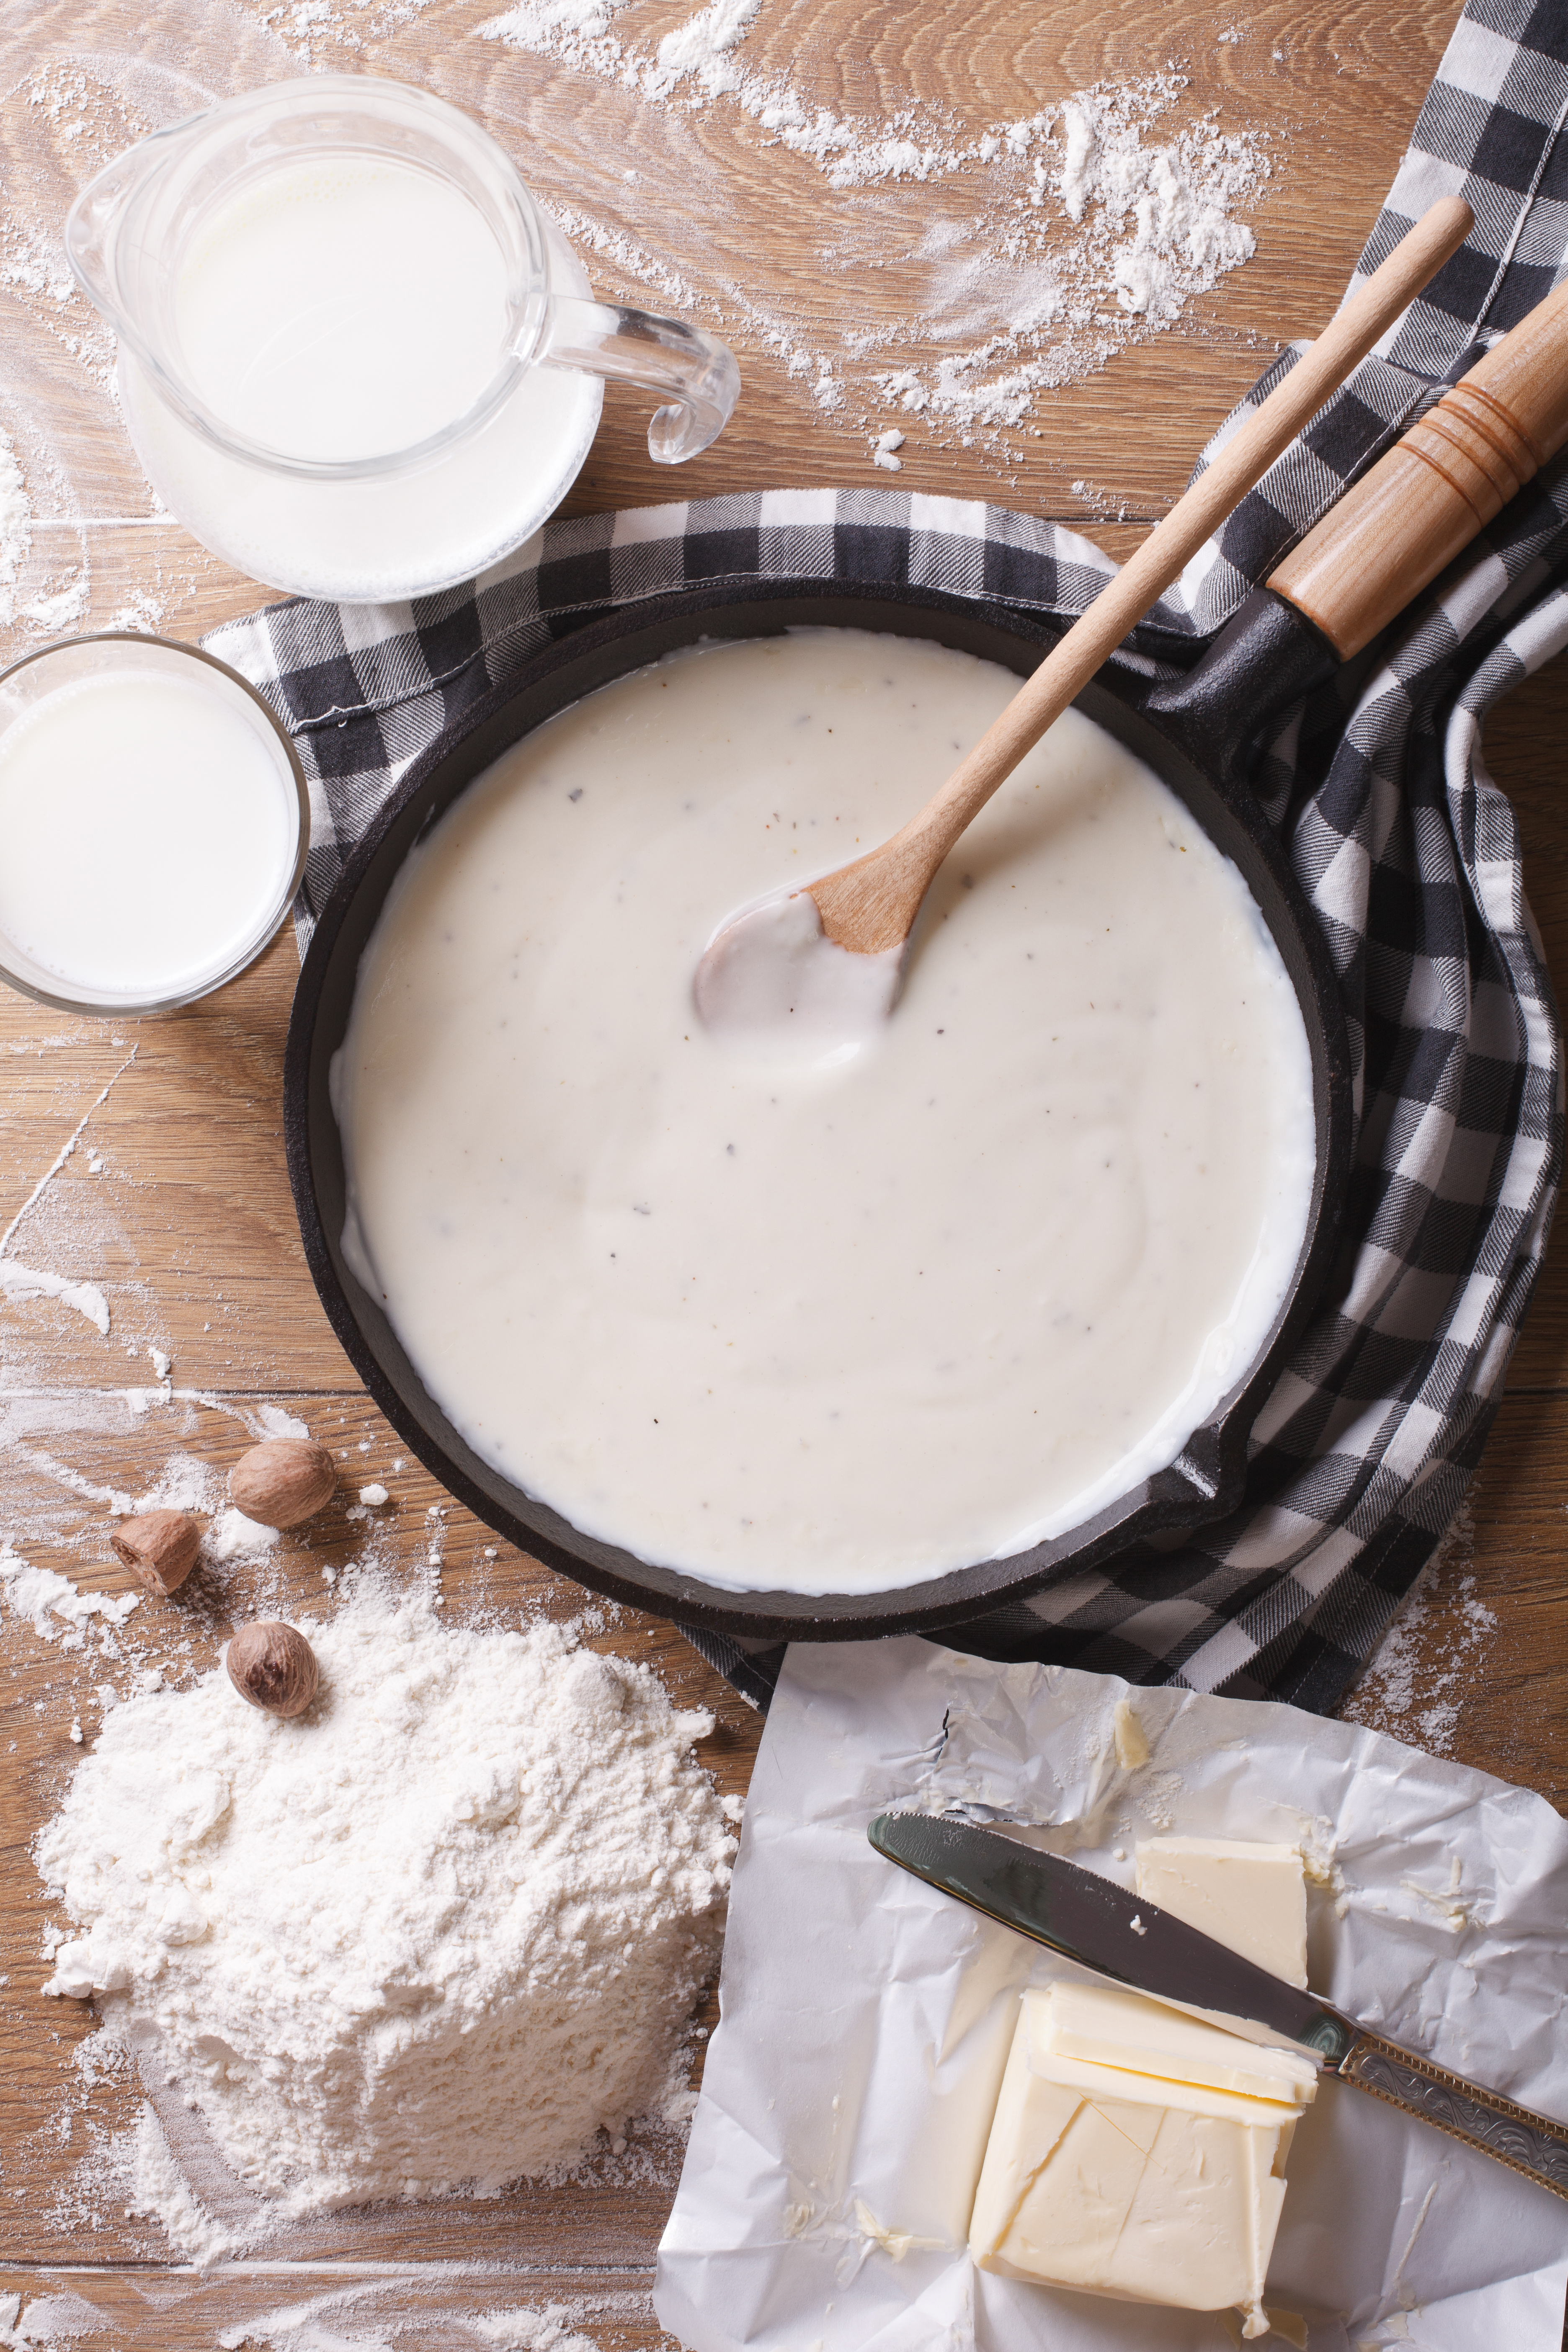 bechamel sauce in a pan with a wooden spoon next to the ingredients